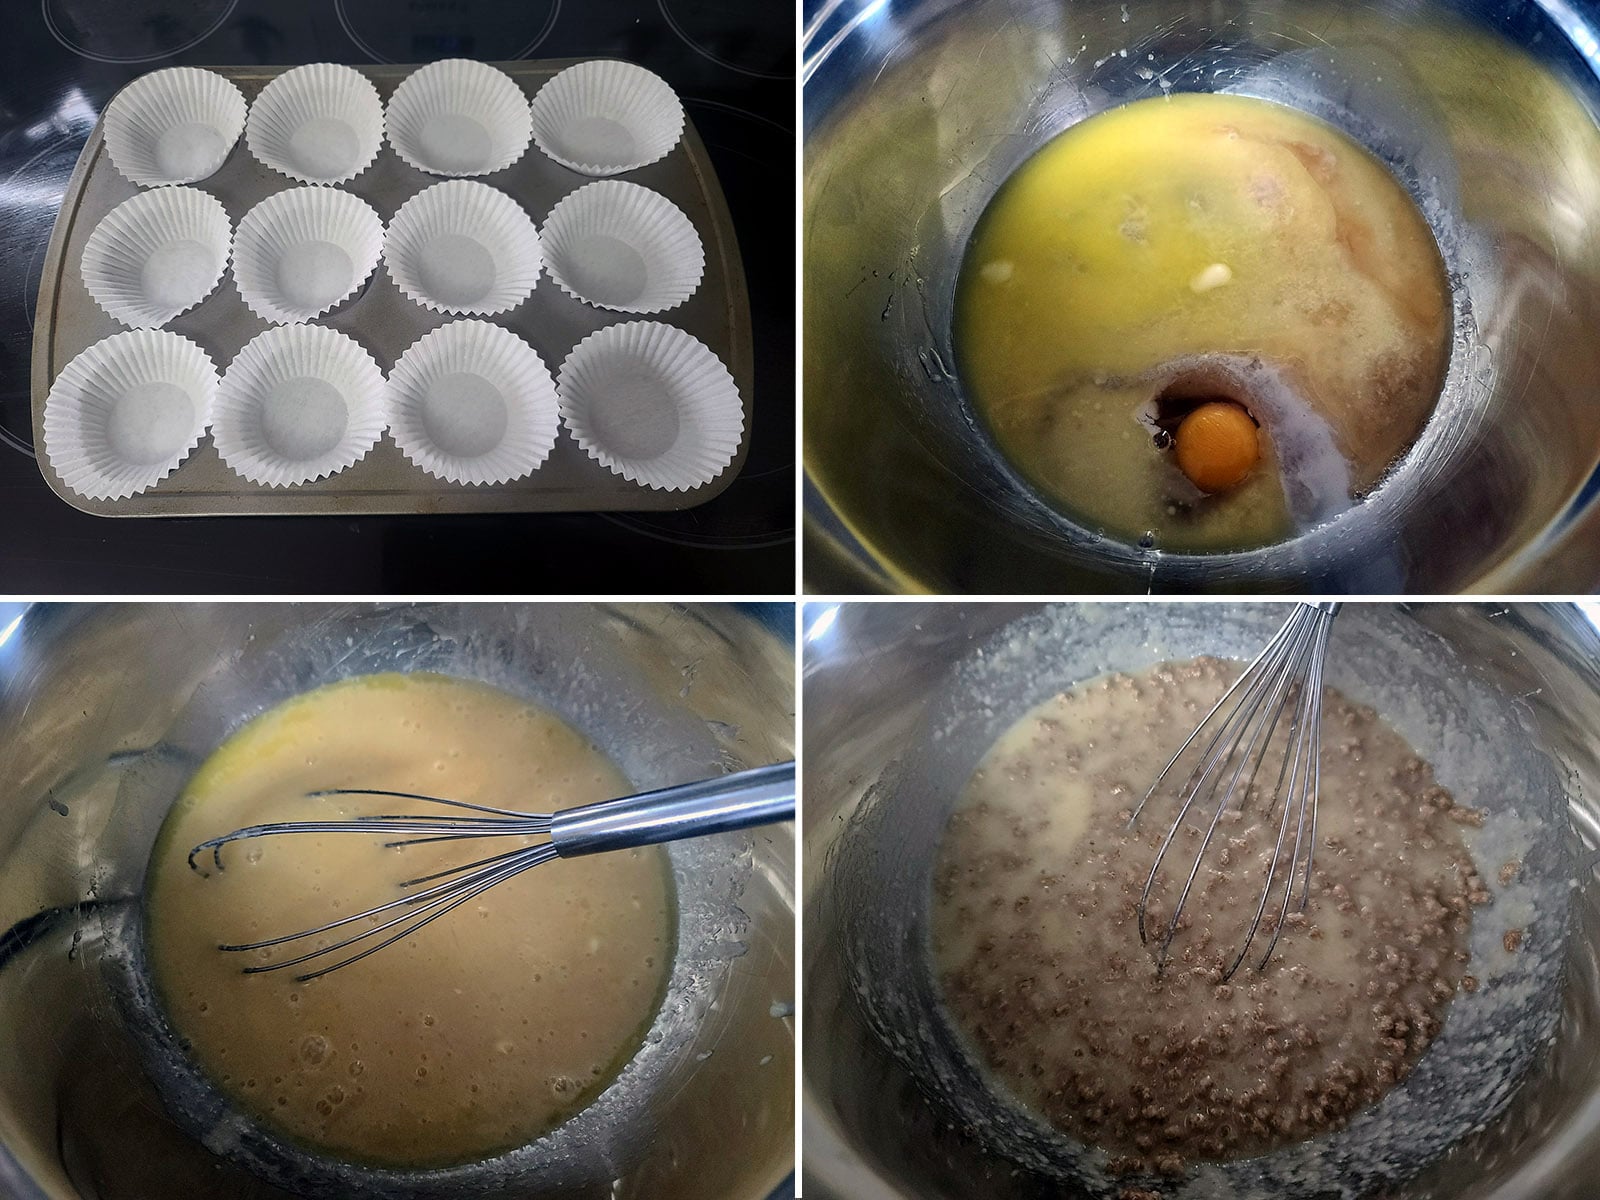 A 4 part image showing the muffin cups being lined and wet ingredients mixed with the All-Bran cereal.